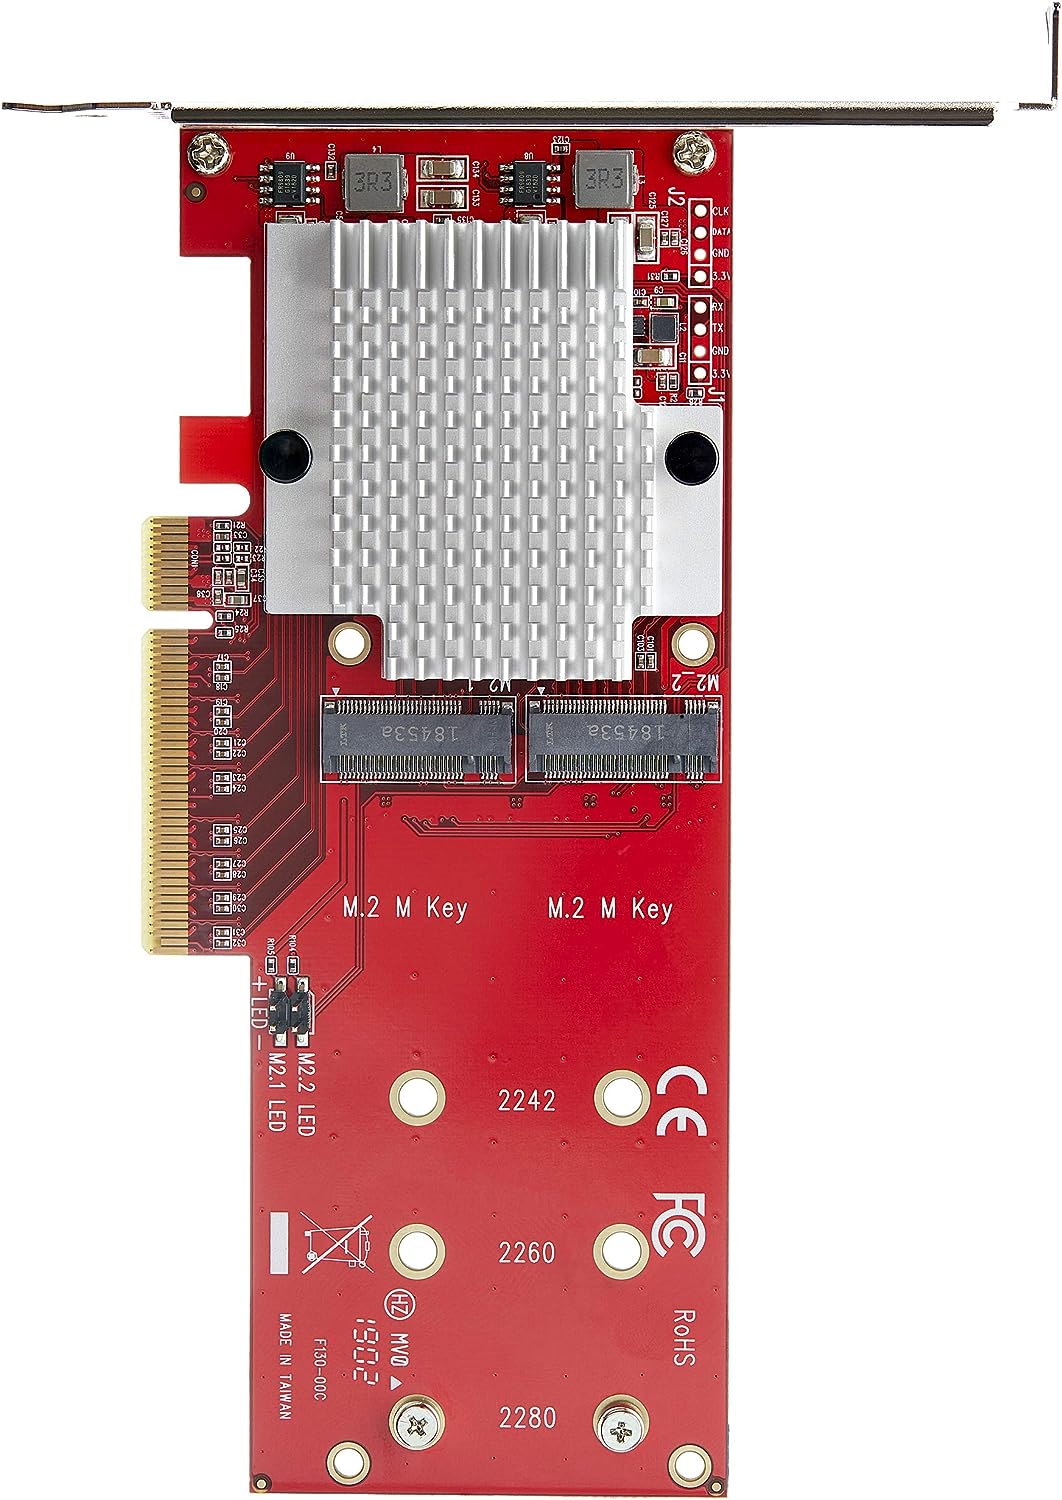 StarTech.com x8 PCI Express to Dual M.2 PCIe SSD Adapter Card